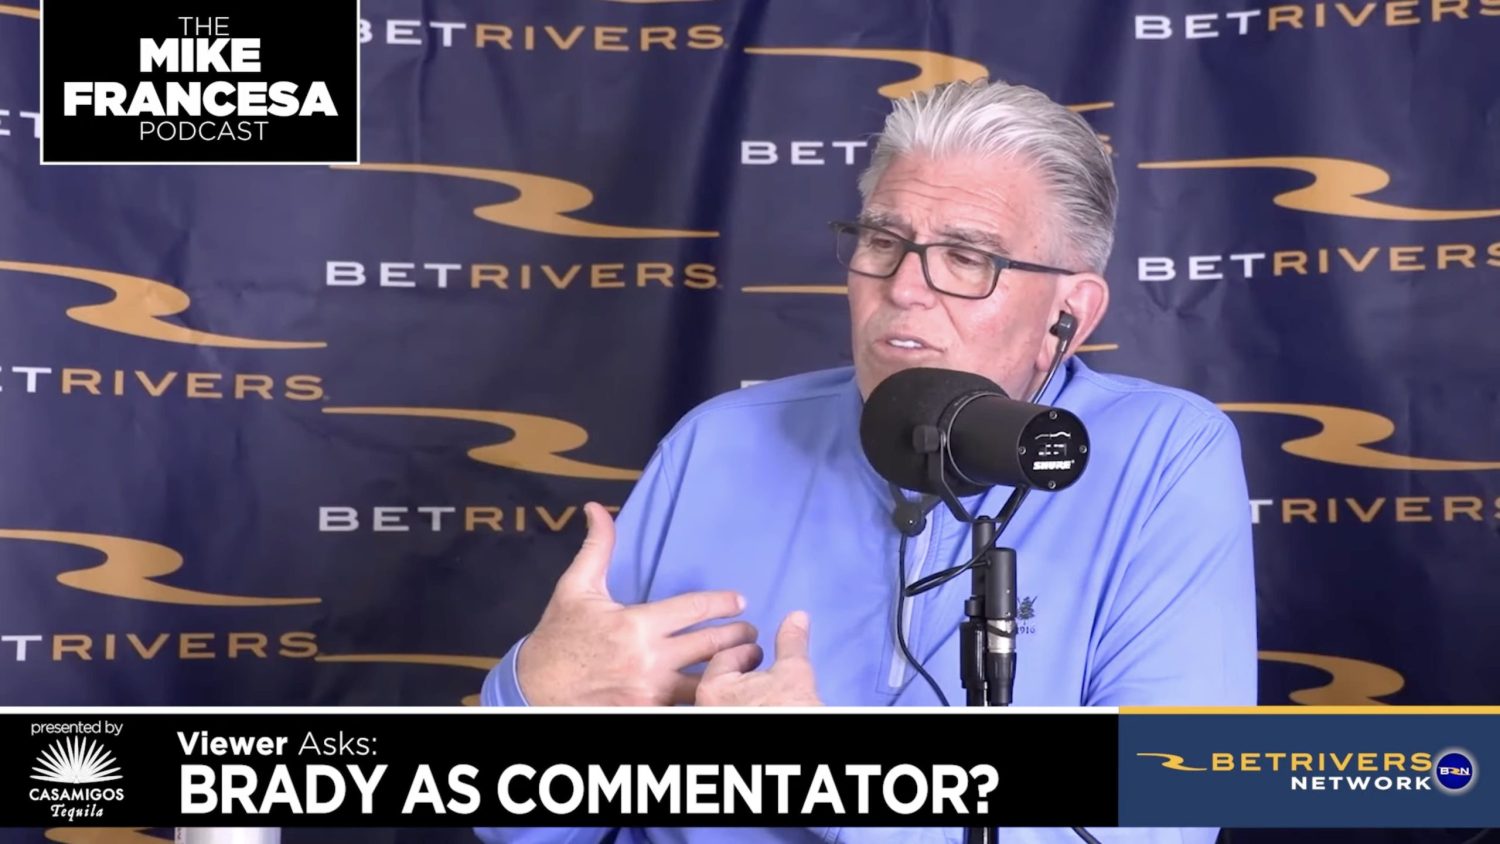 Mike Francesa discusses Tom Brady as a broadcaster